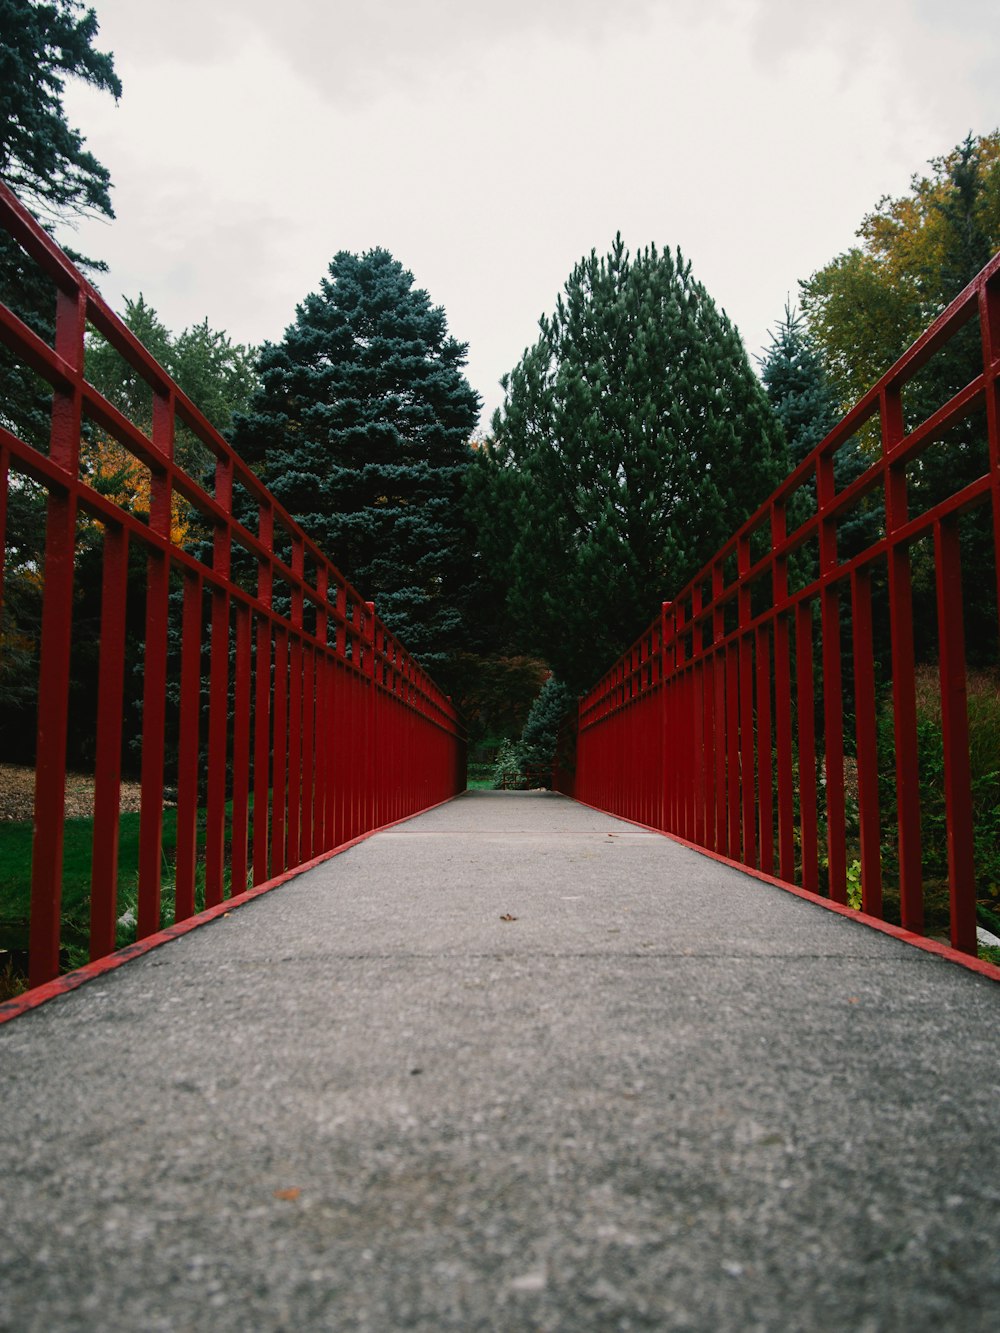 red wooden fence near green trees during daytime